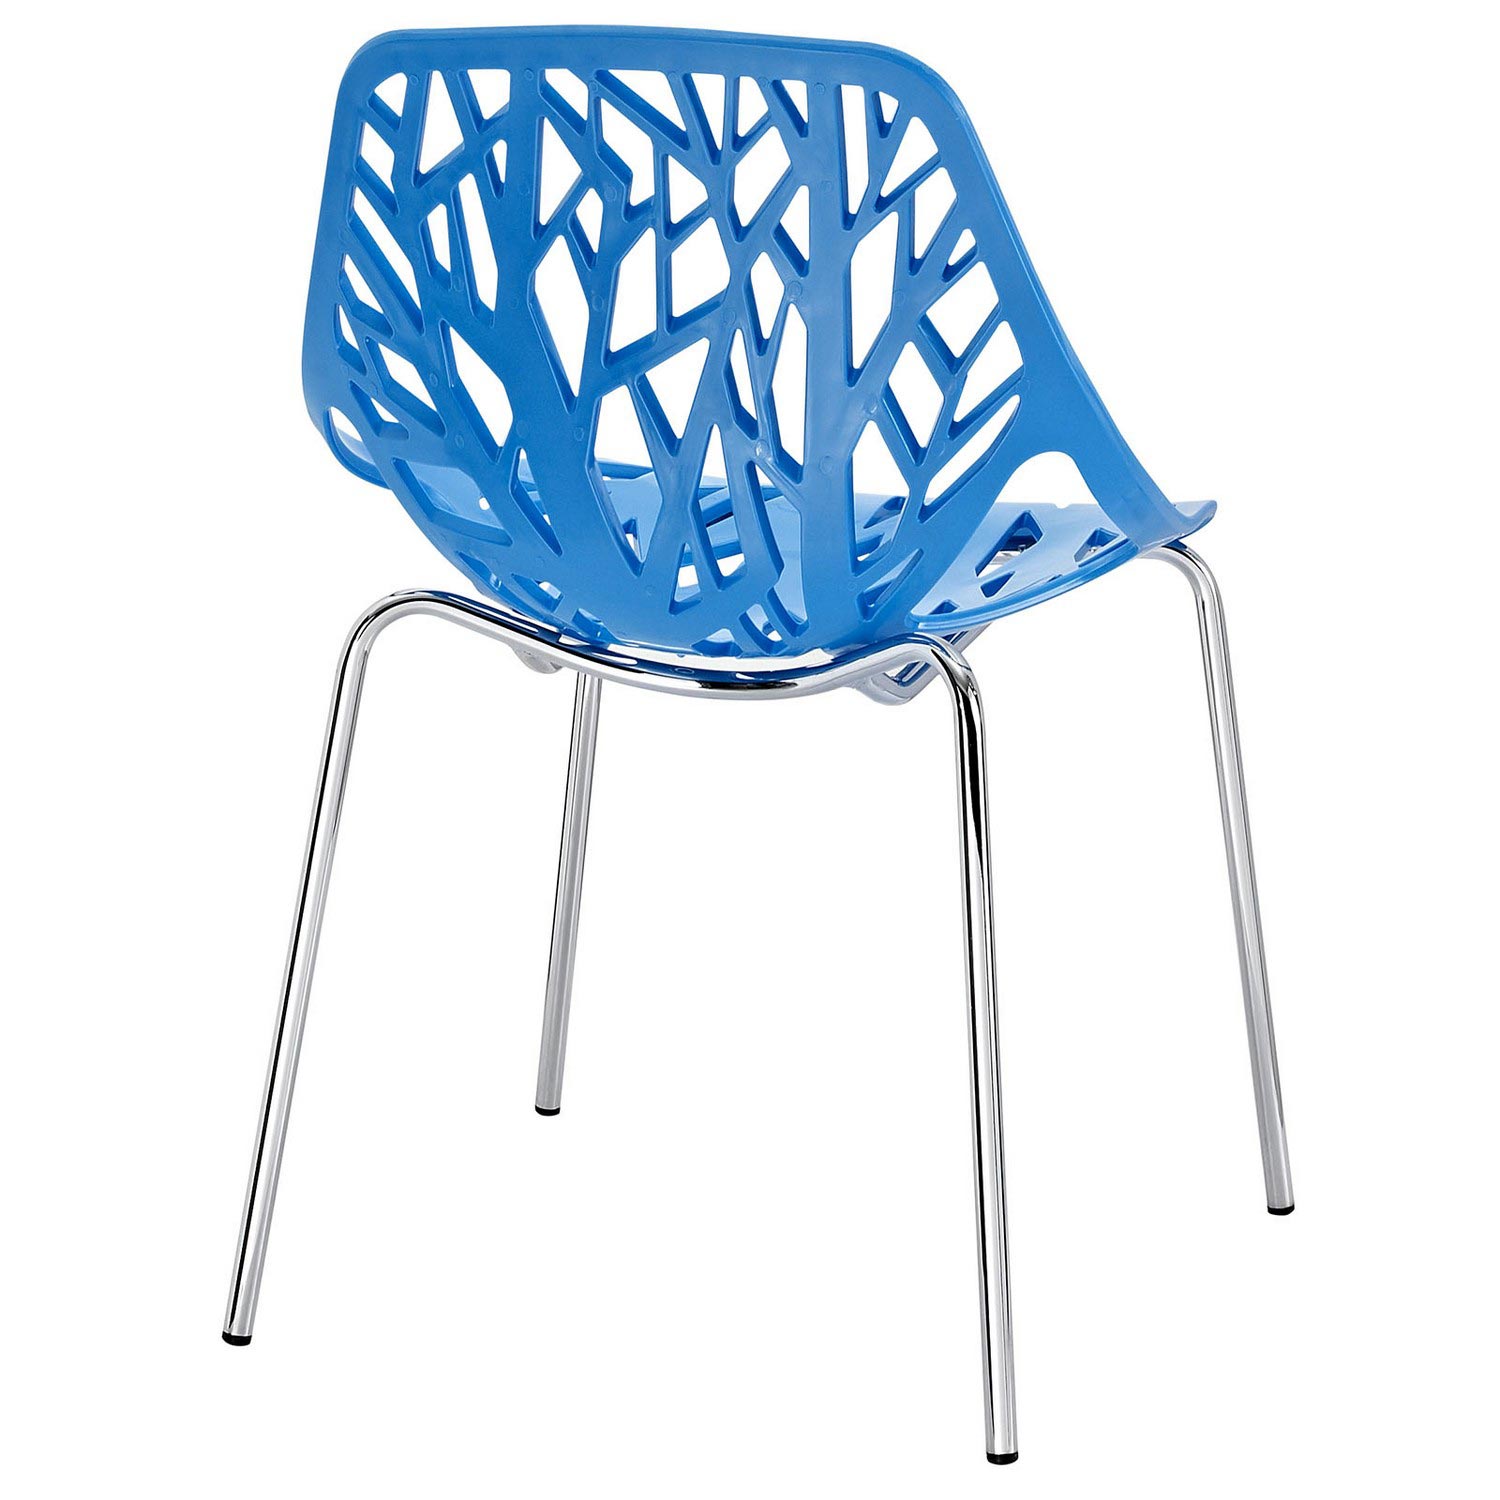 Modway Stencil 4PC Dining Side Chair Set - Blue